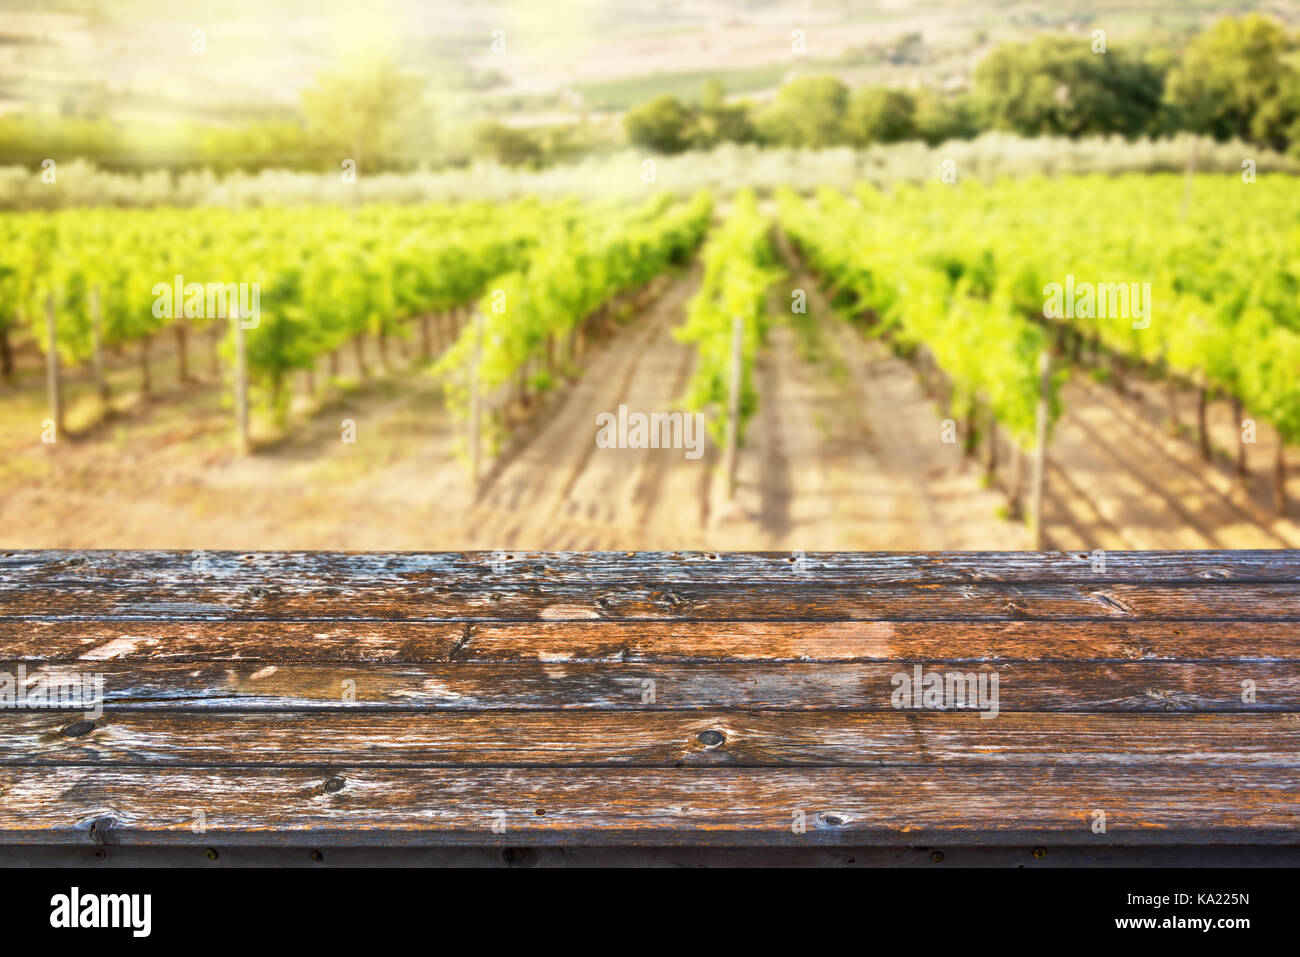 Empty wooden table top, sunny vineyard background, ready to use for display or montage of your products Stock Photo